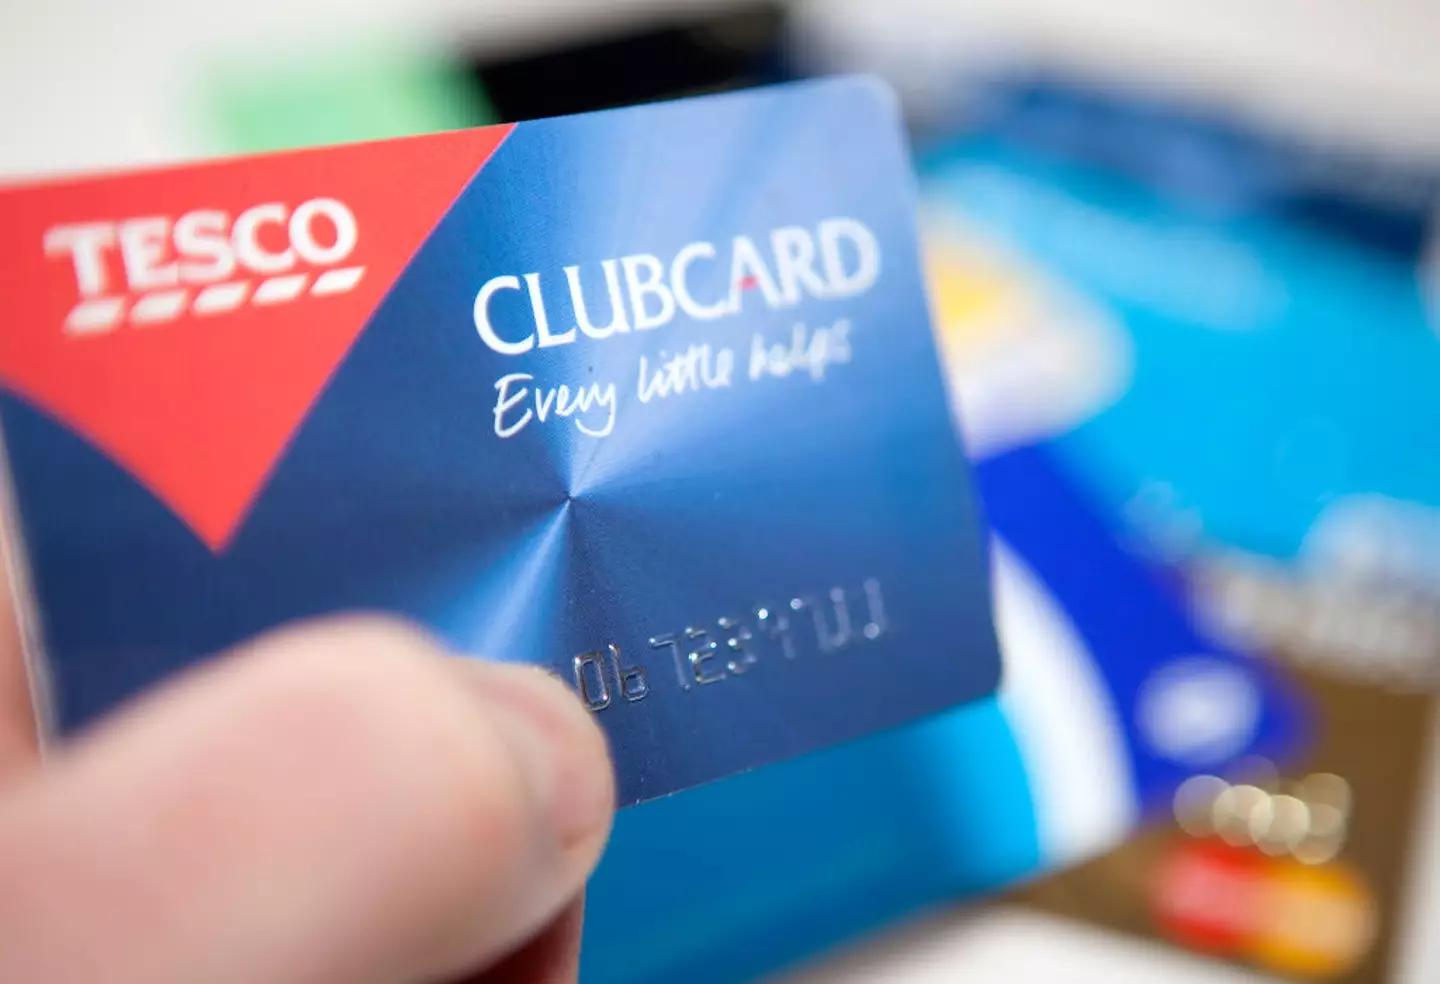 Money Saving Expert has issued a two-week warning regarding Tesco's Clubcard. (Getty Stock Image)